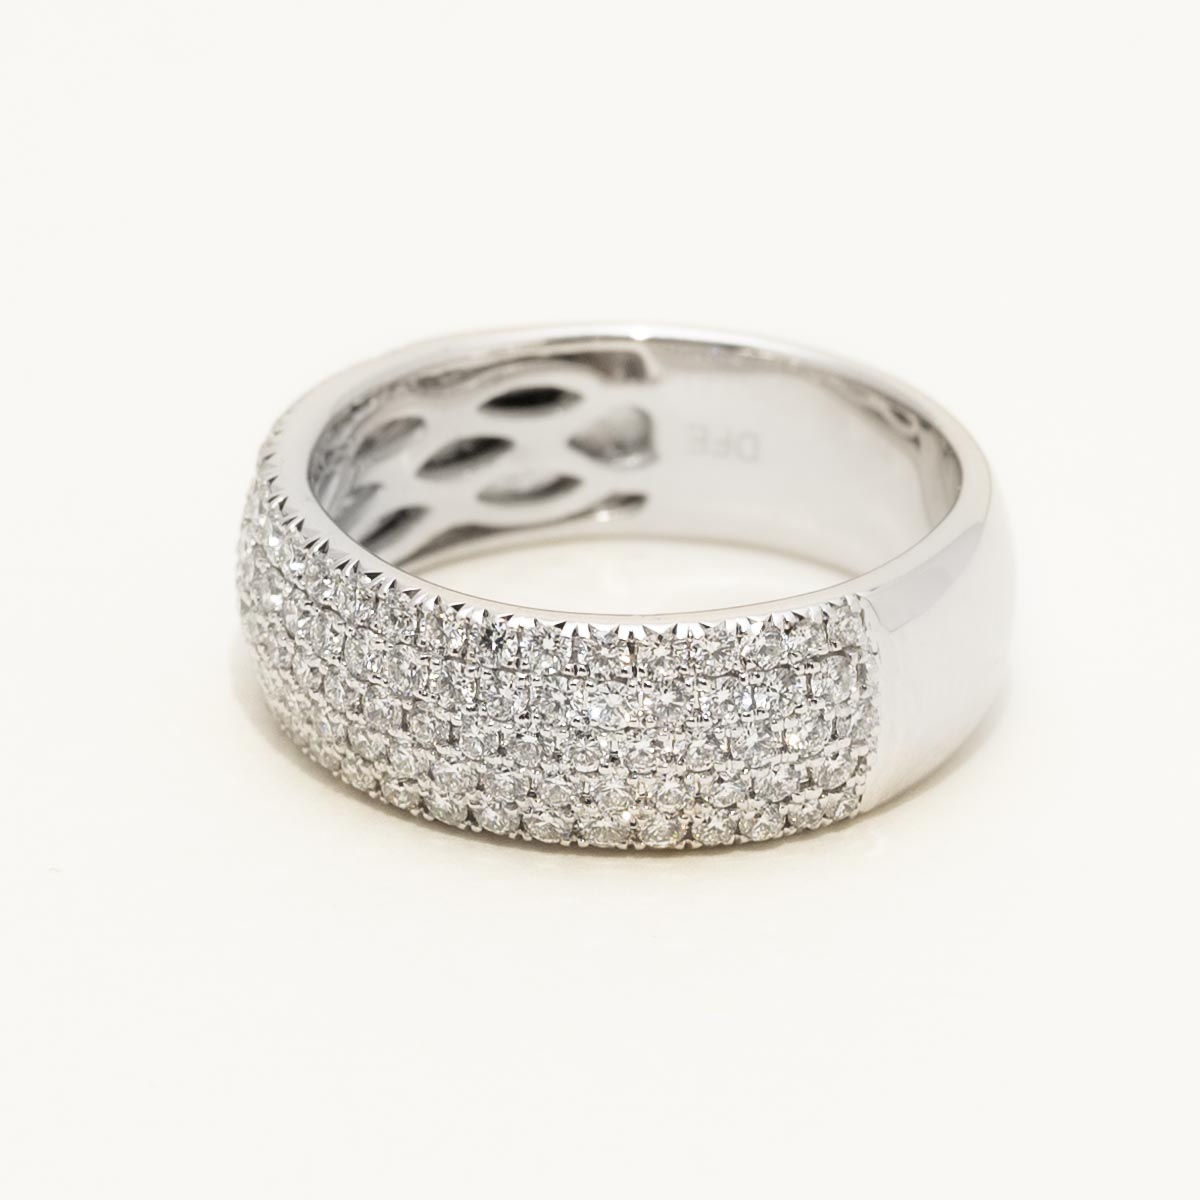 Pave Diamond Ring in 14kt White Gold (1ct tw)